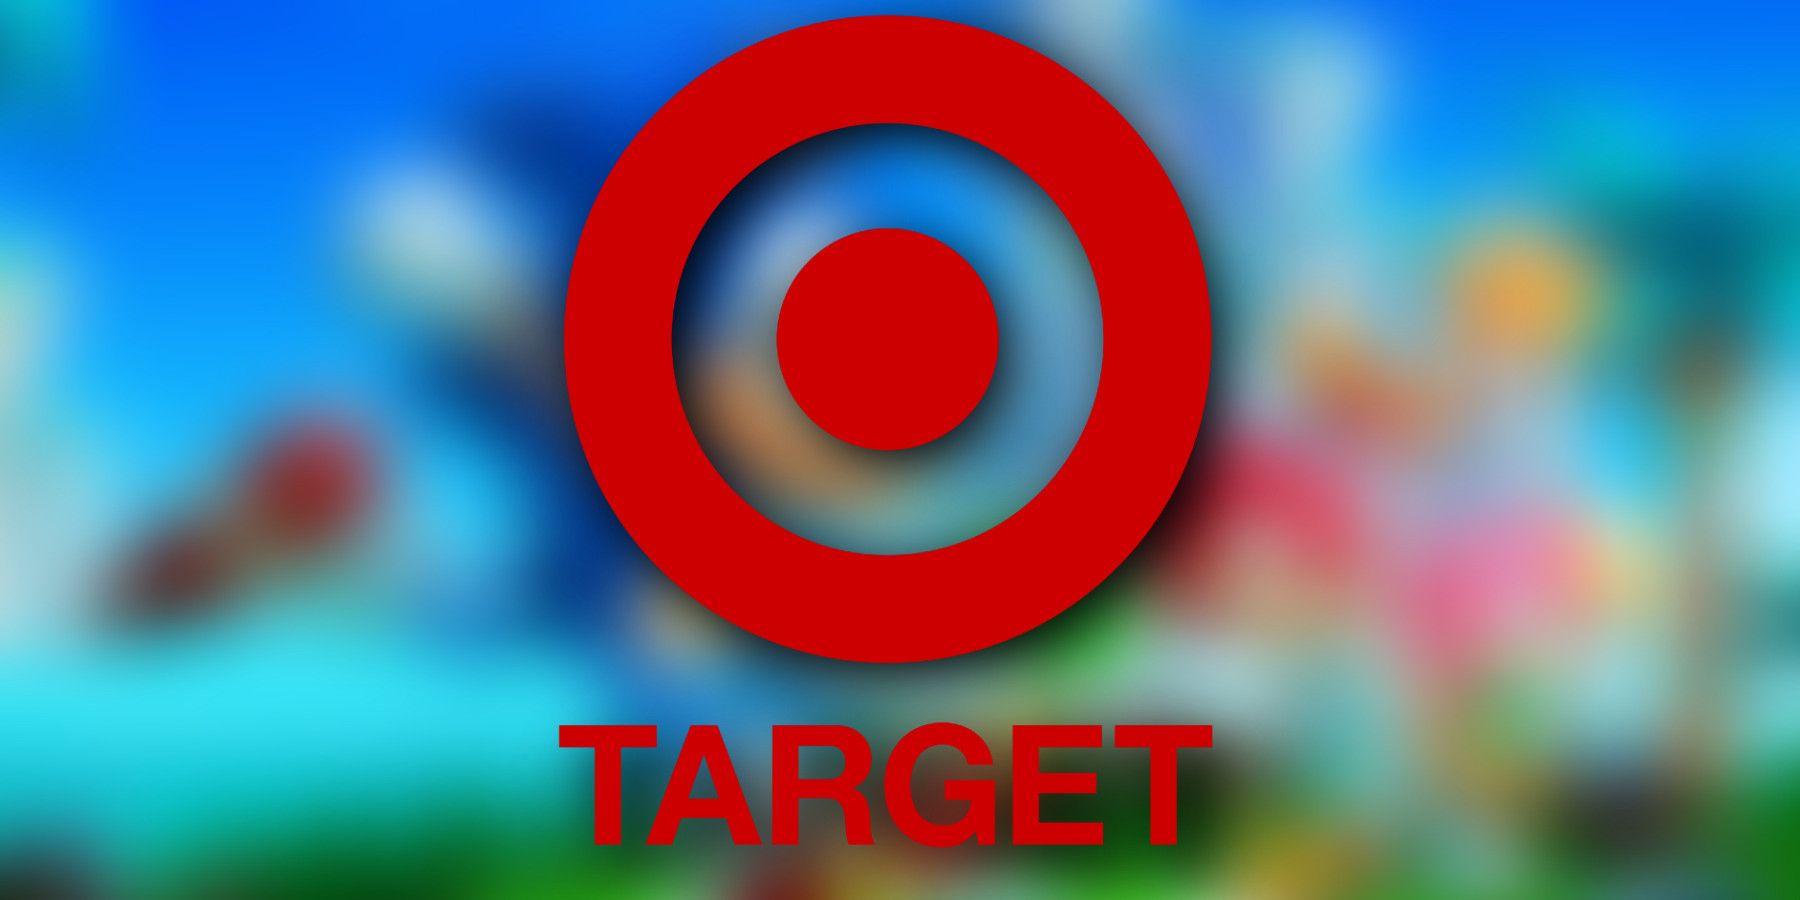 target logo with sonic superstars in background